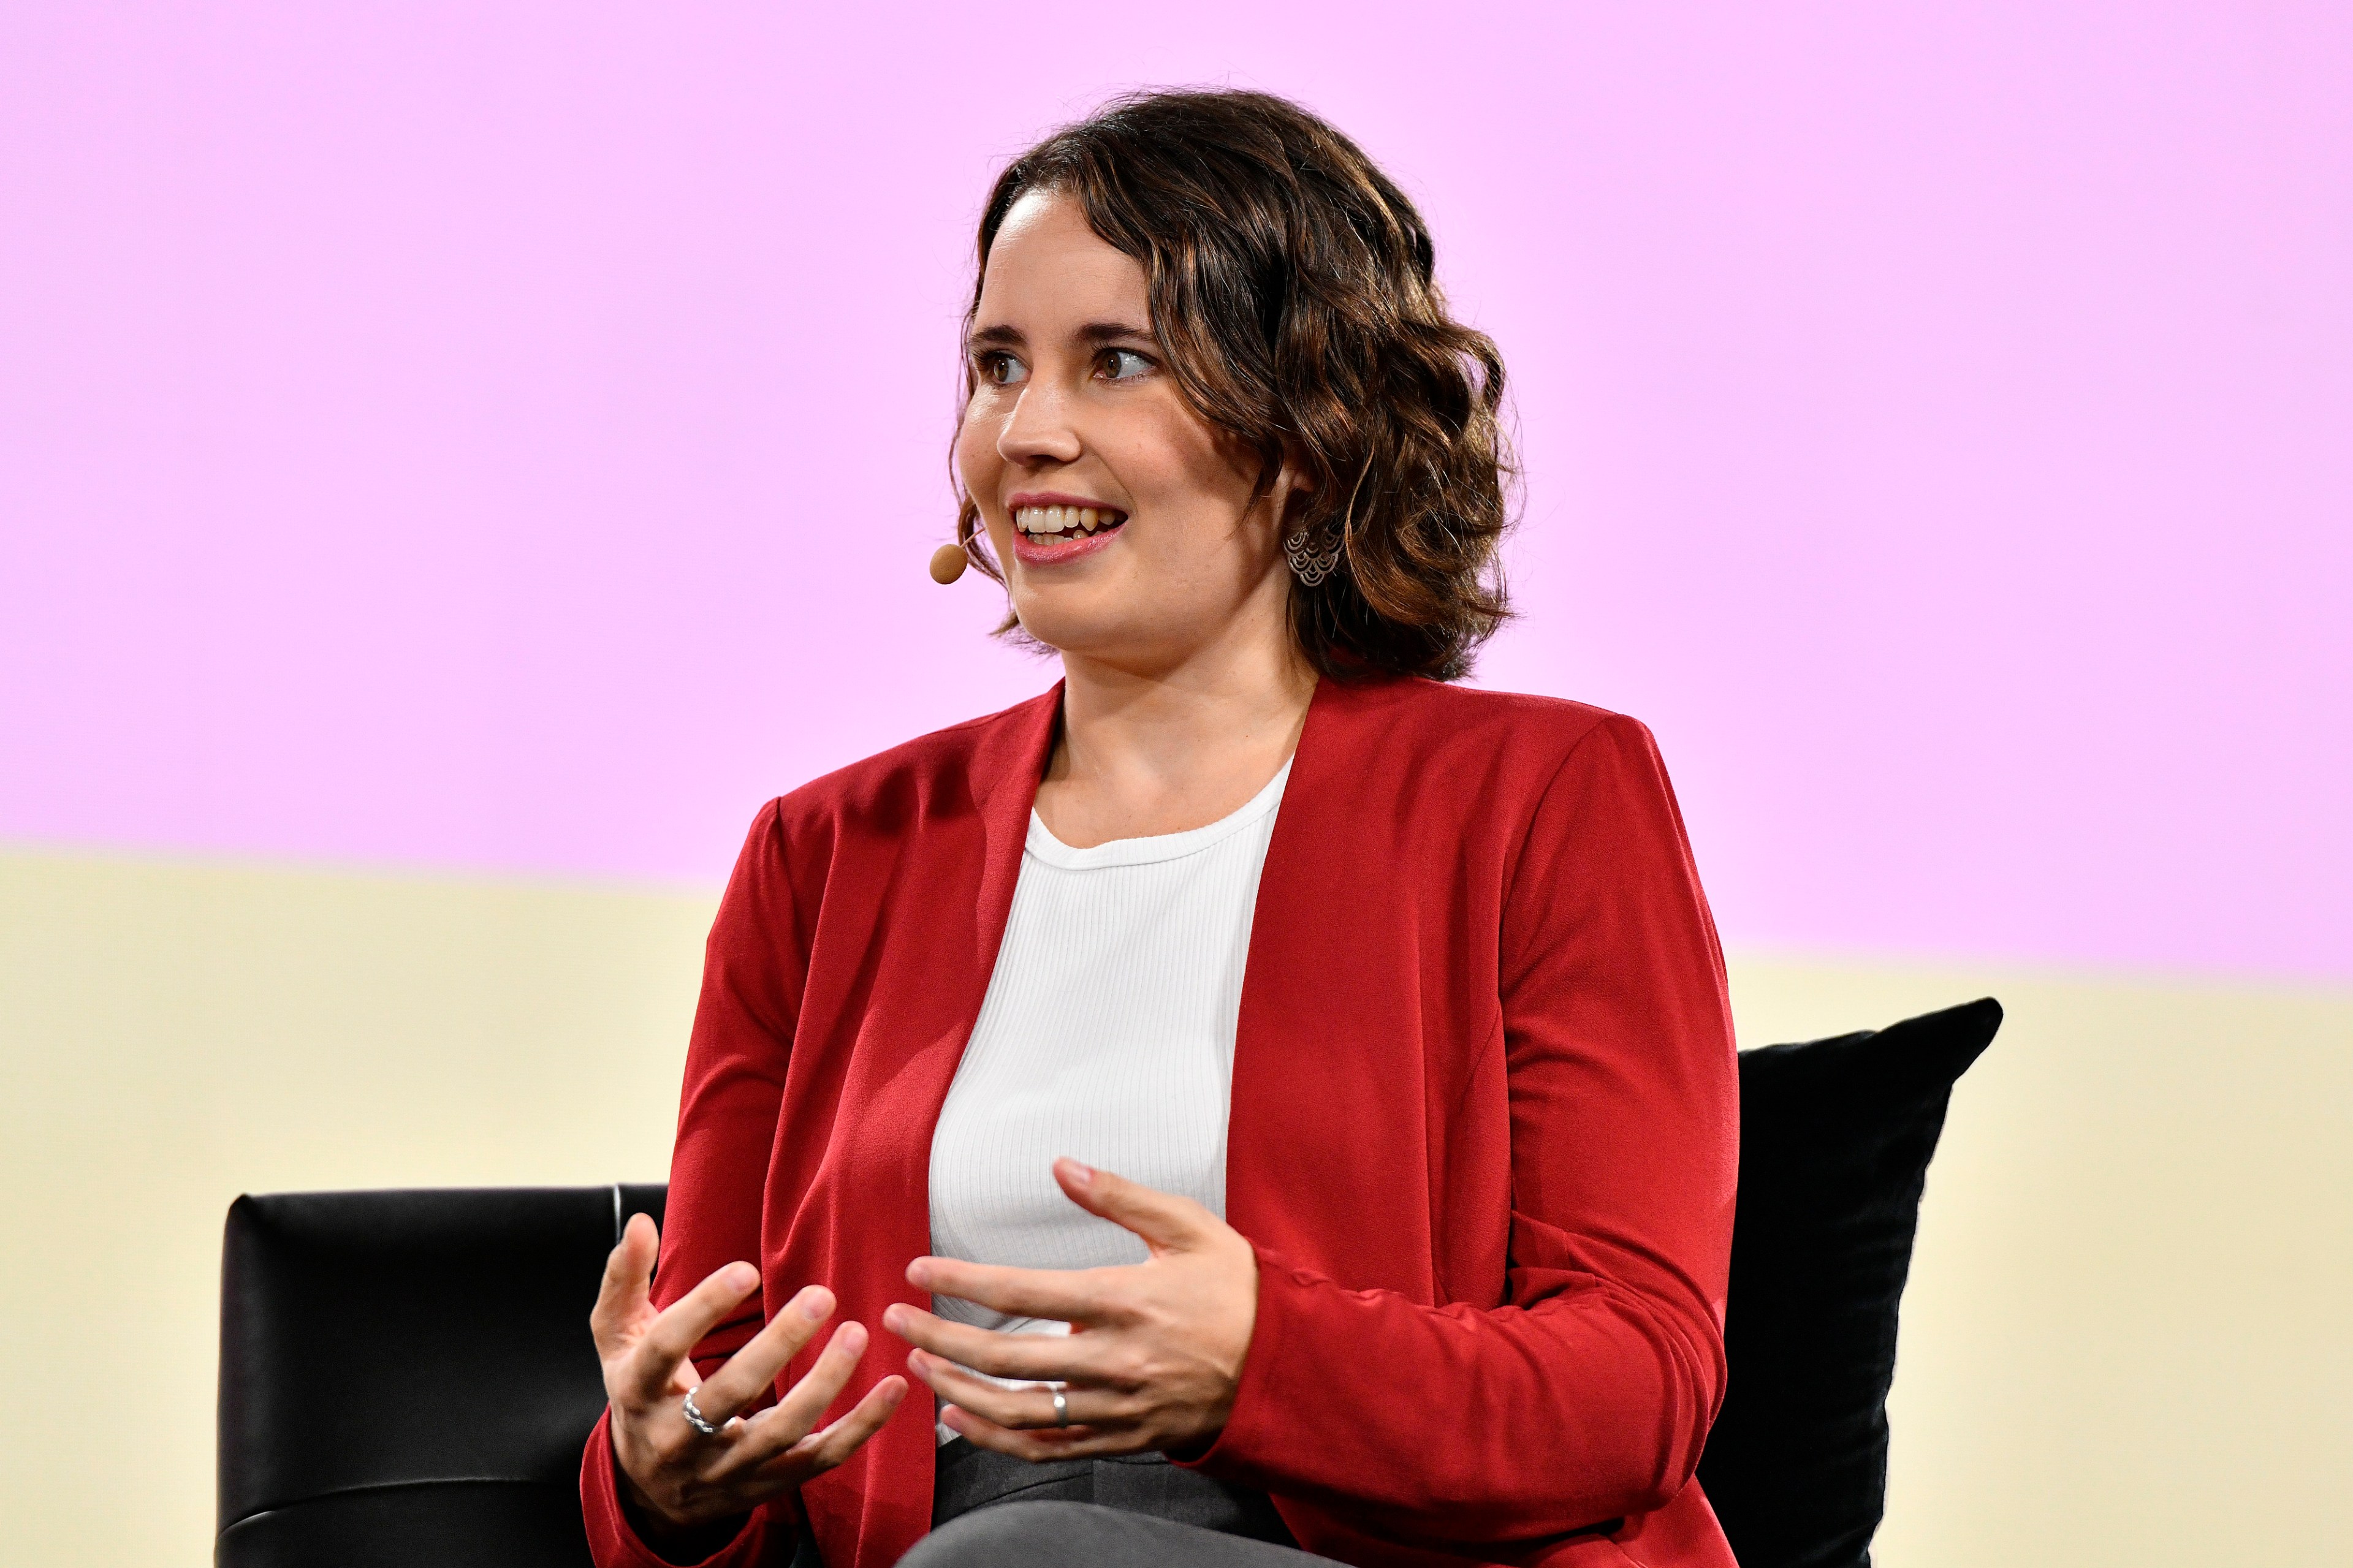 Helen Toner of Georgetown's CSET wears a red cardigan and a white blouse speaking at Vox Media's 2023 Code Conference. Behind her is a pink and yellow background.